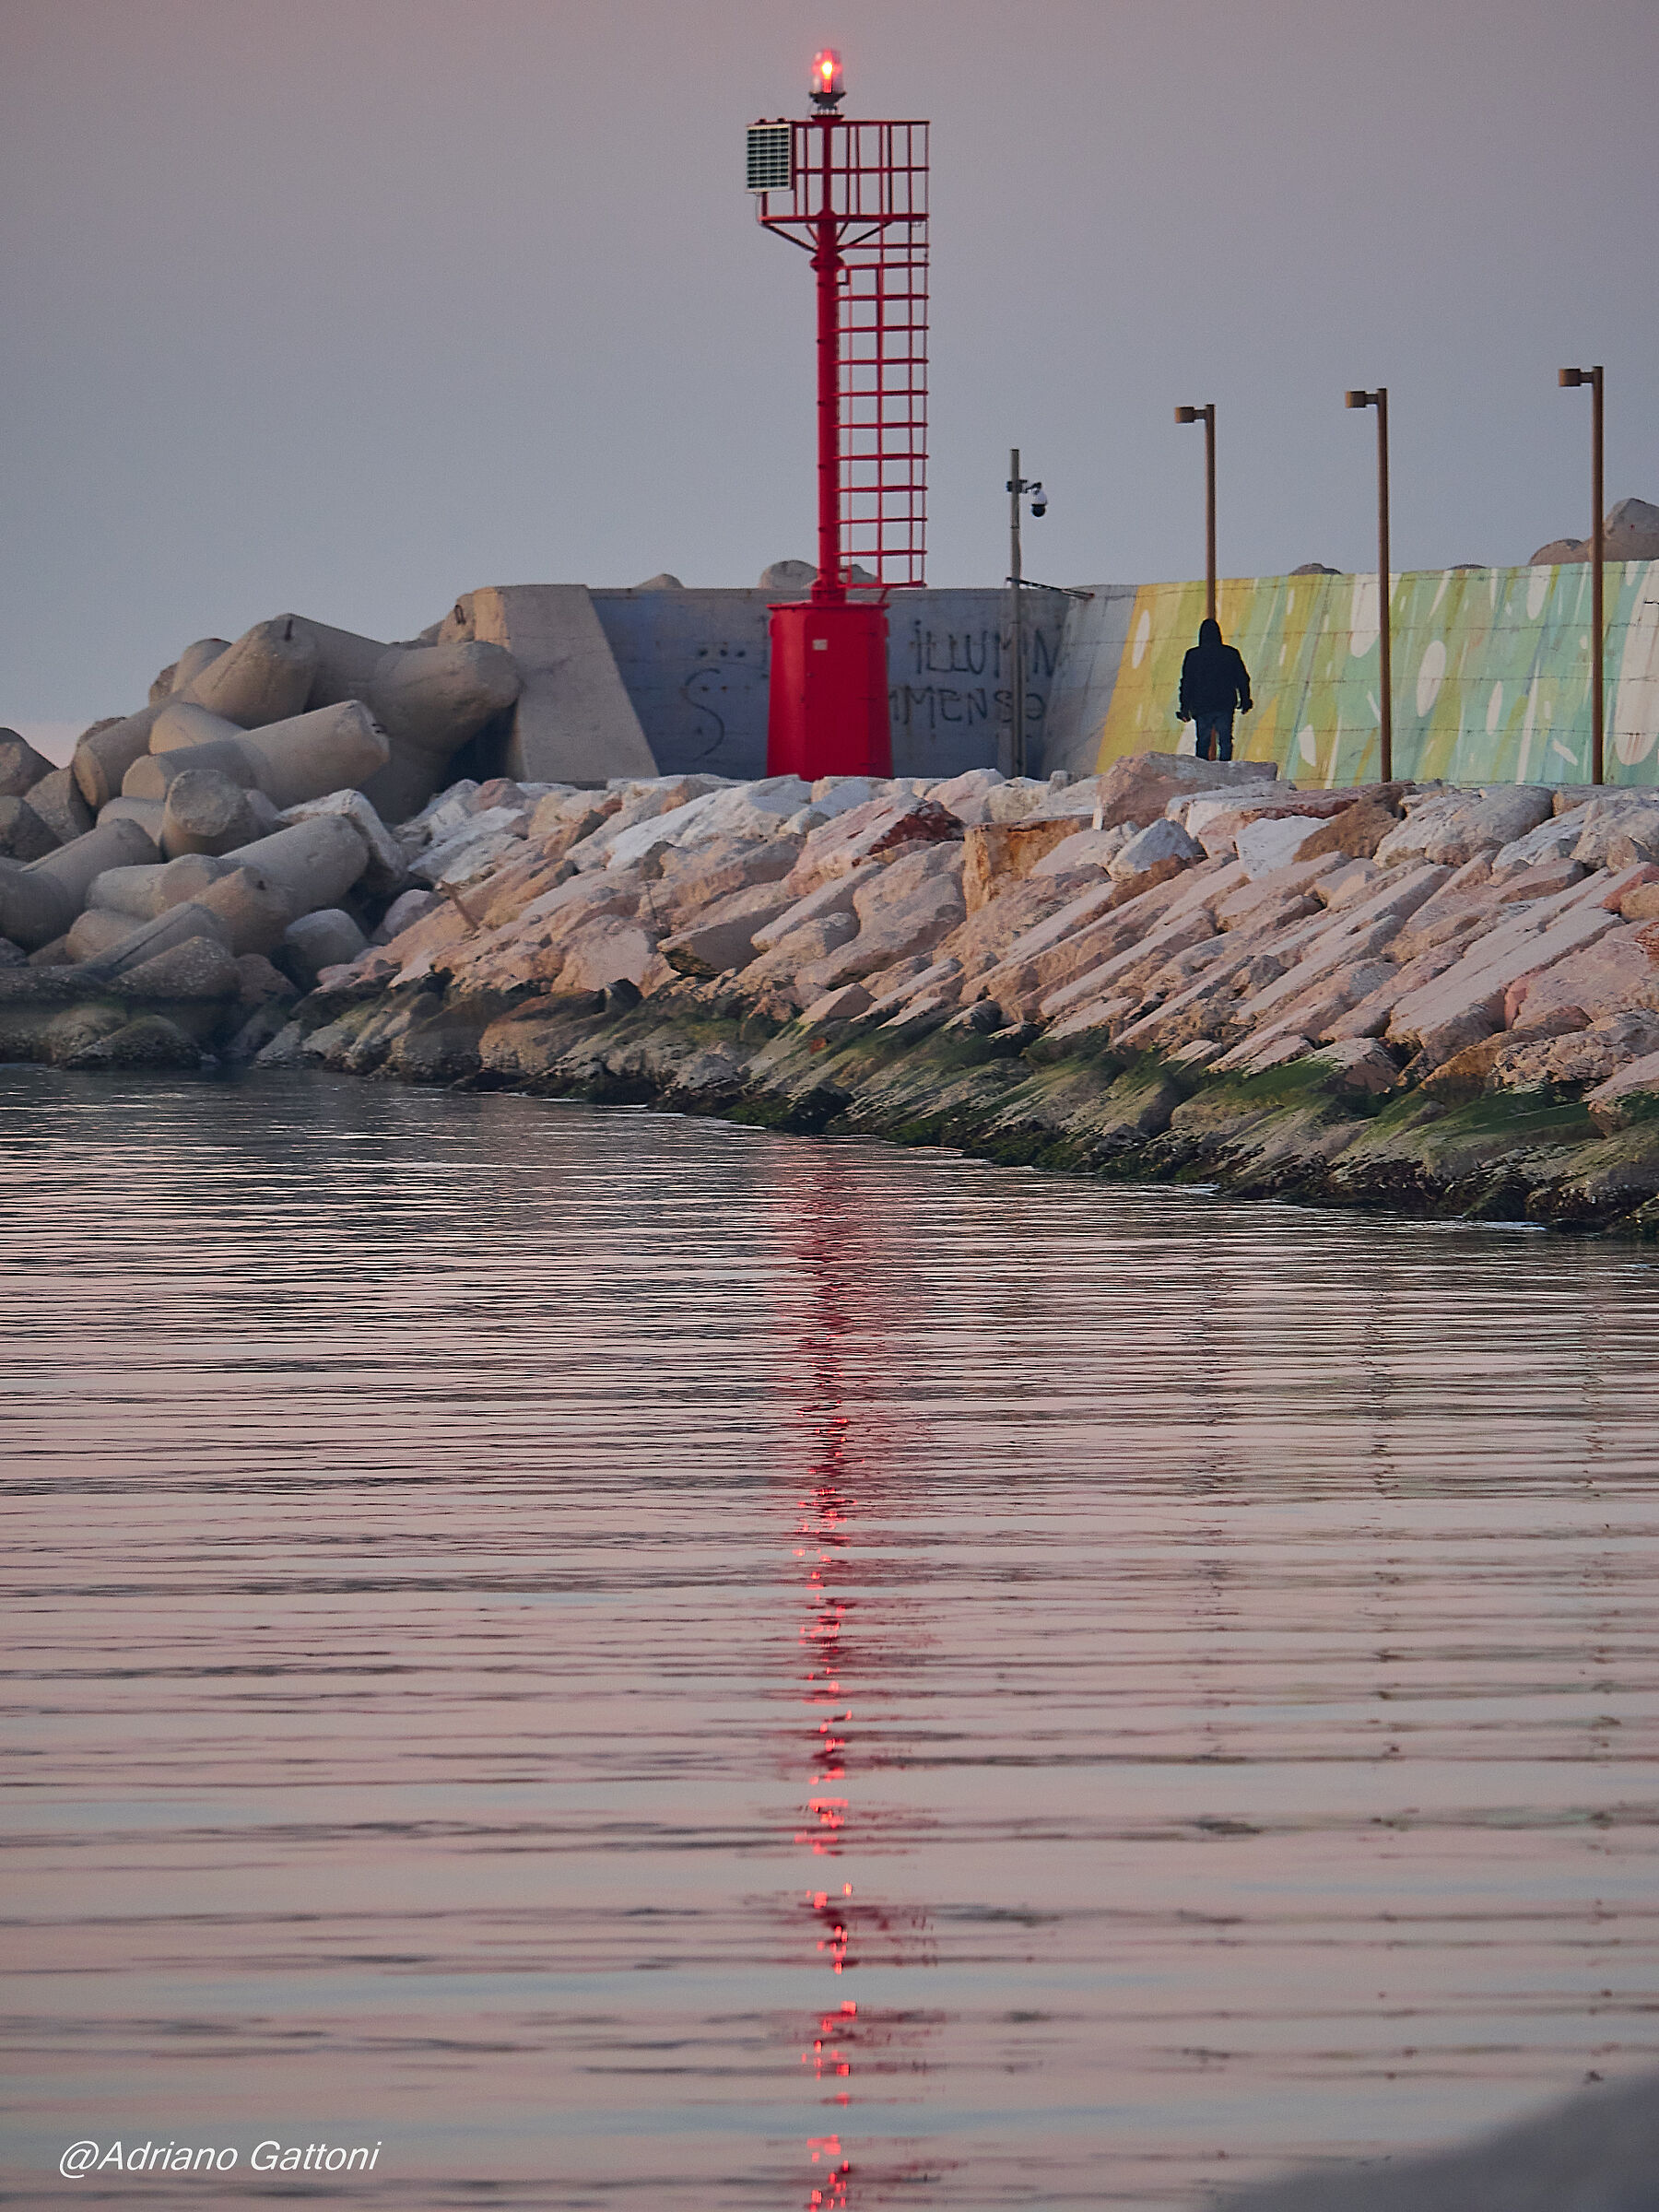 First light of the evening at the port of Pesaro...